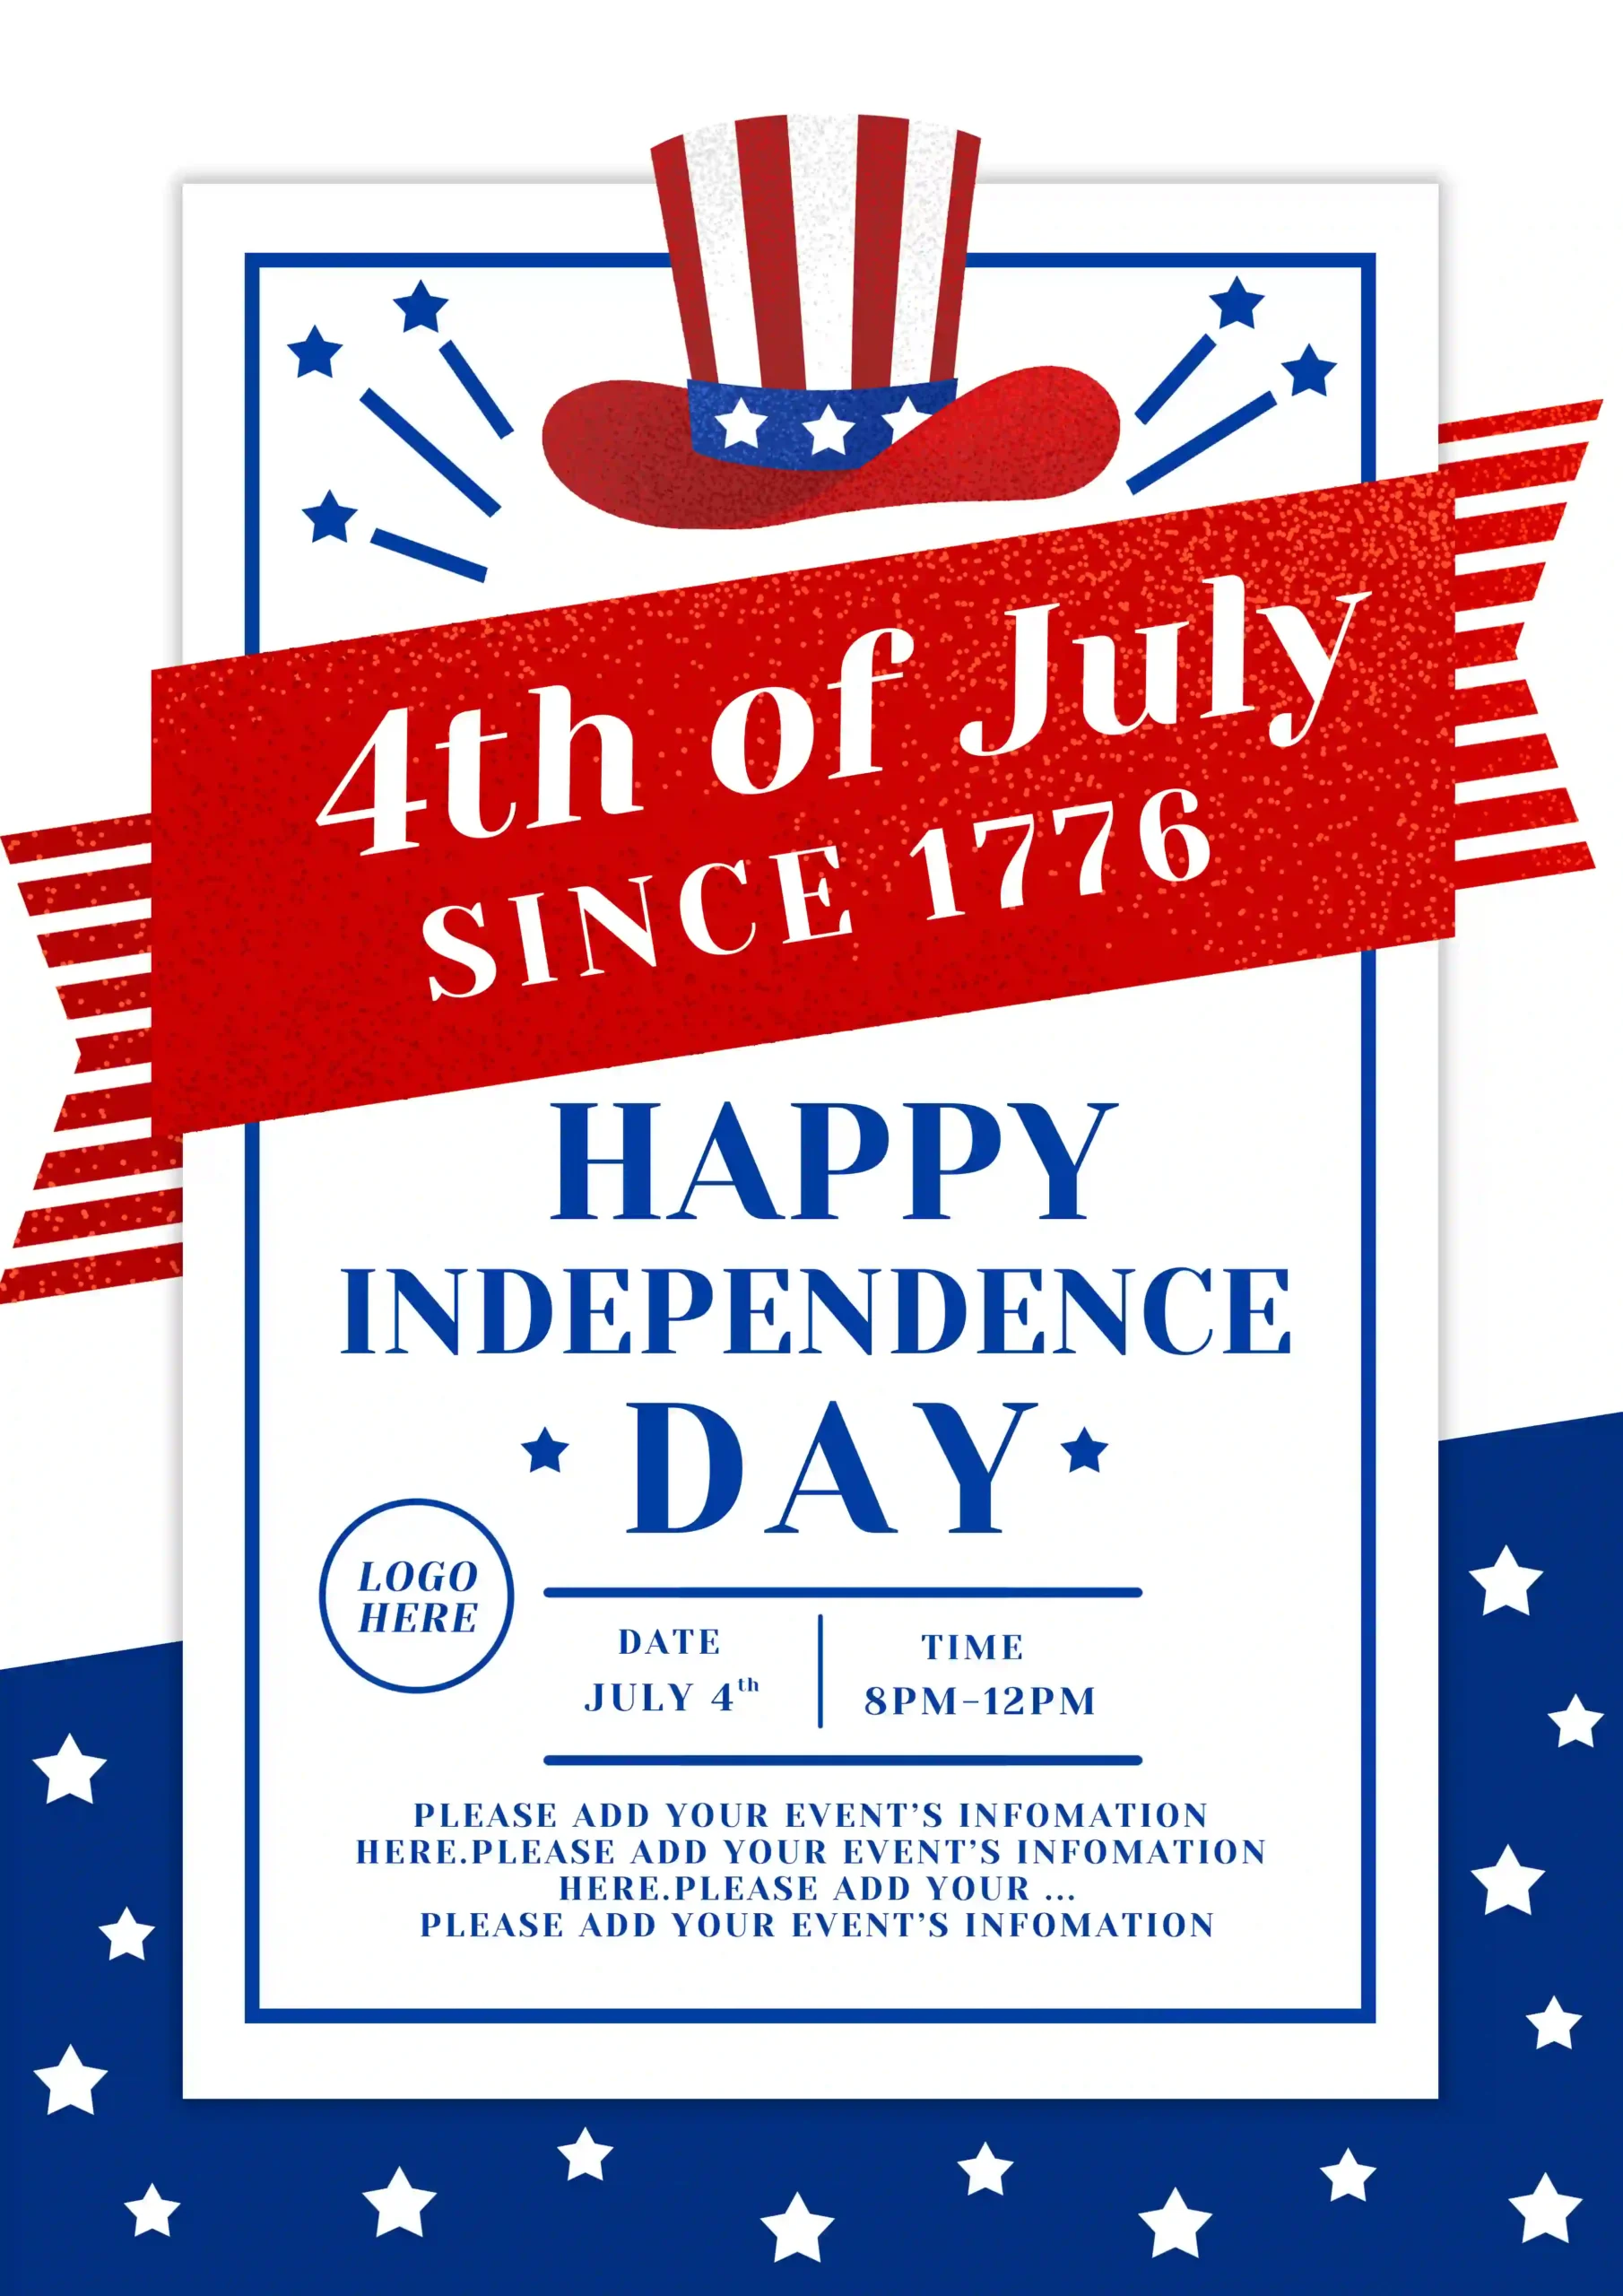 Happy American Independence Day PSD Free Download